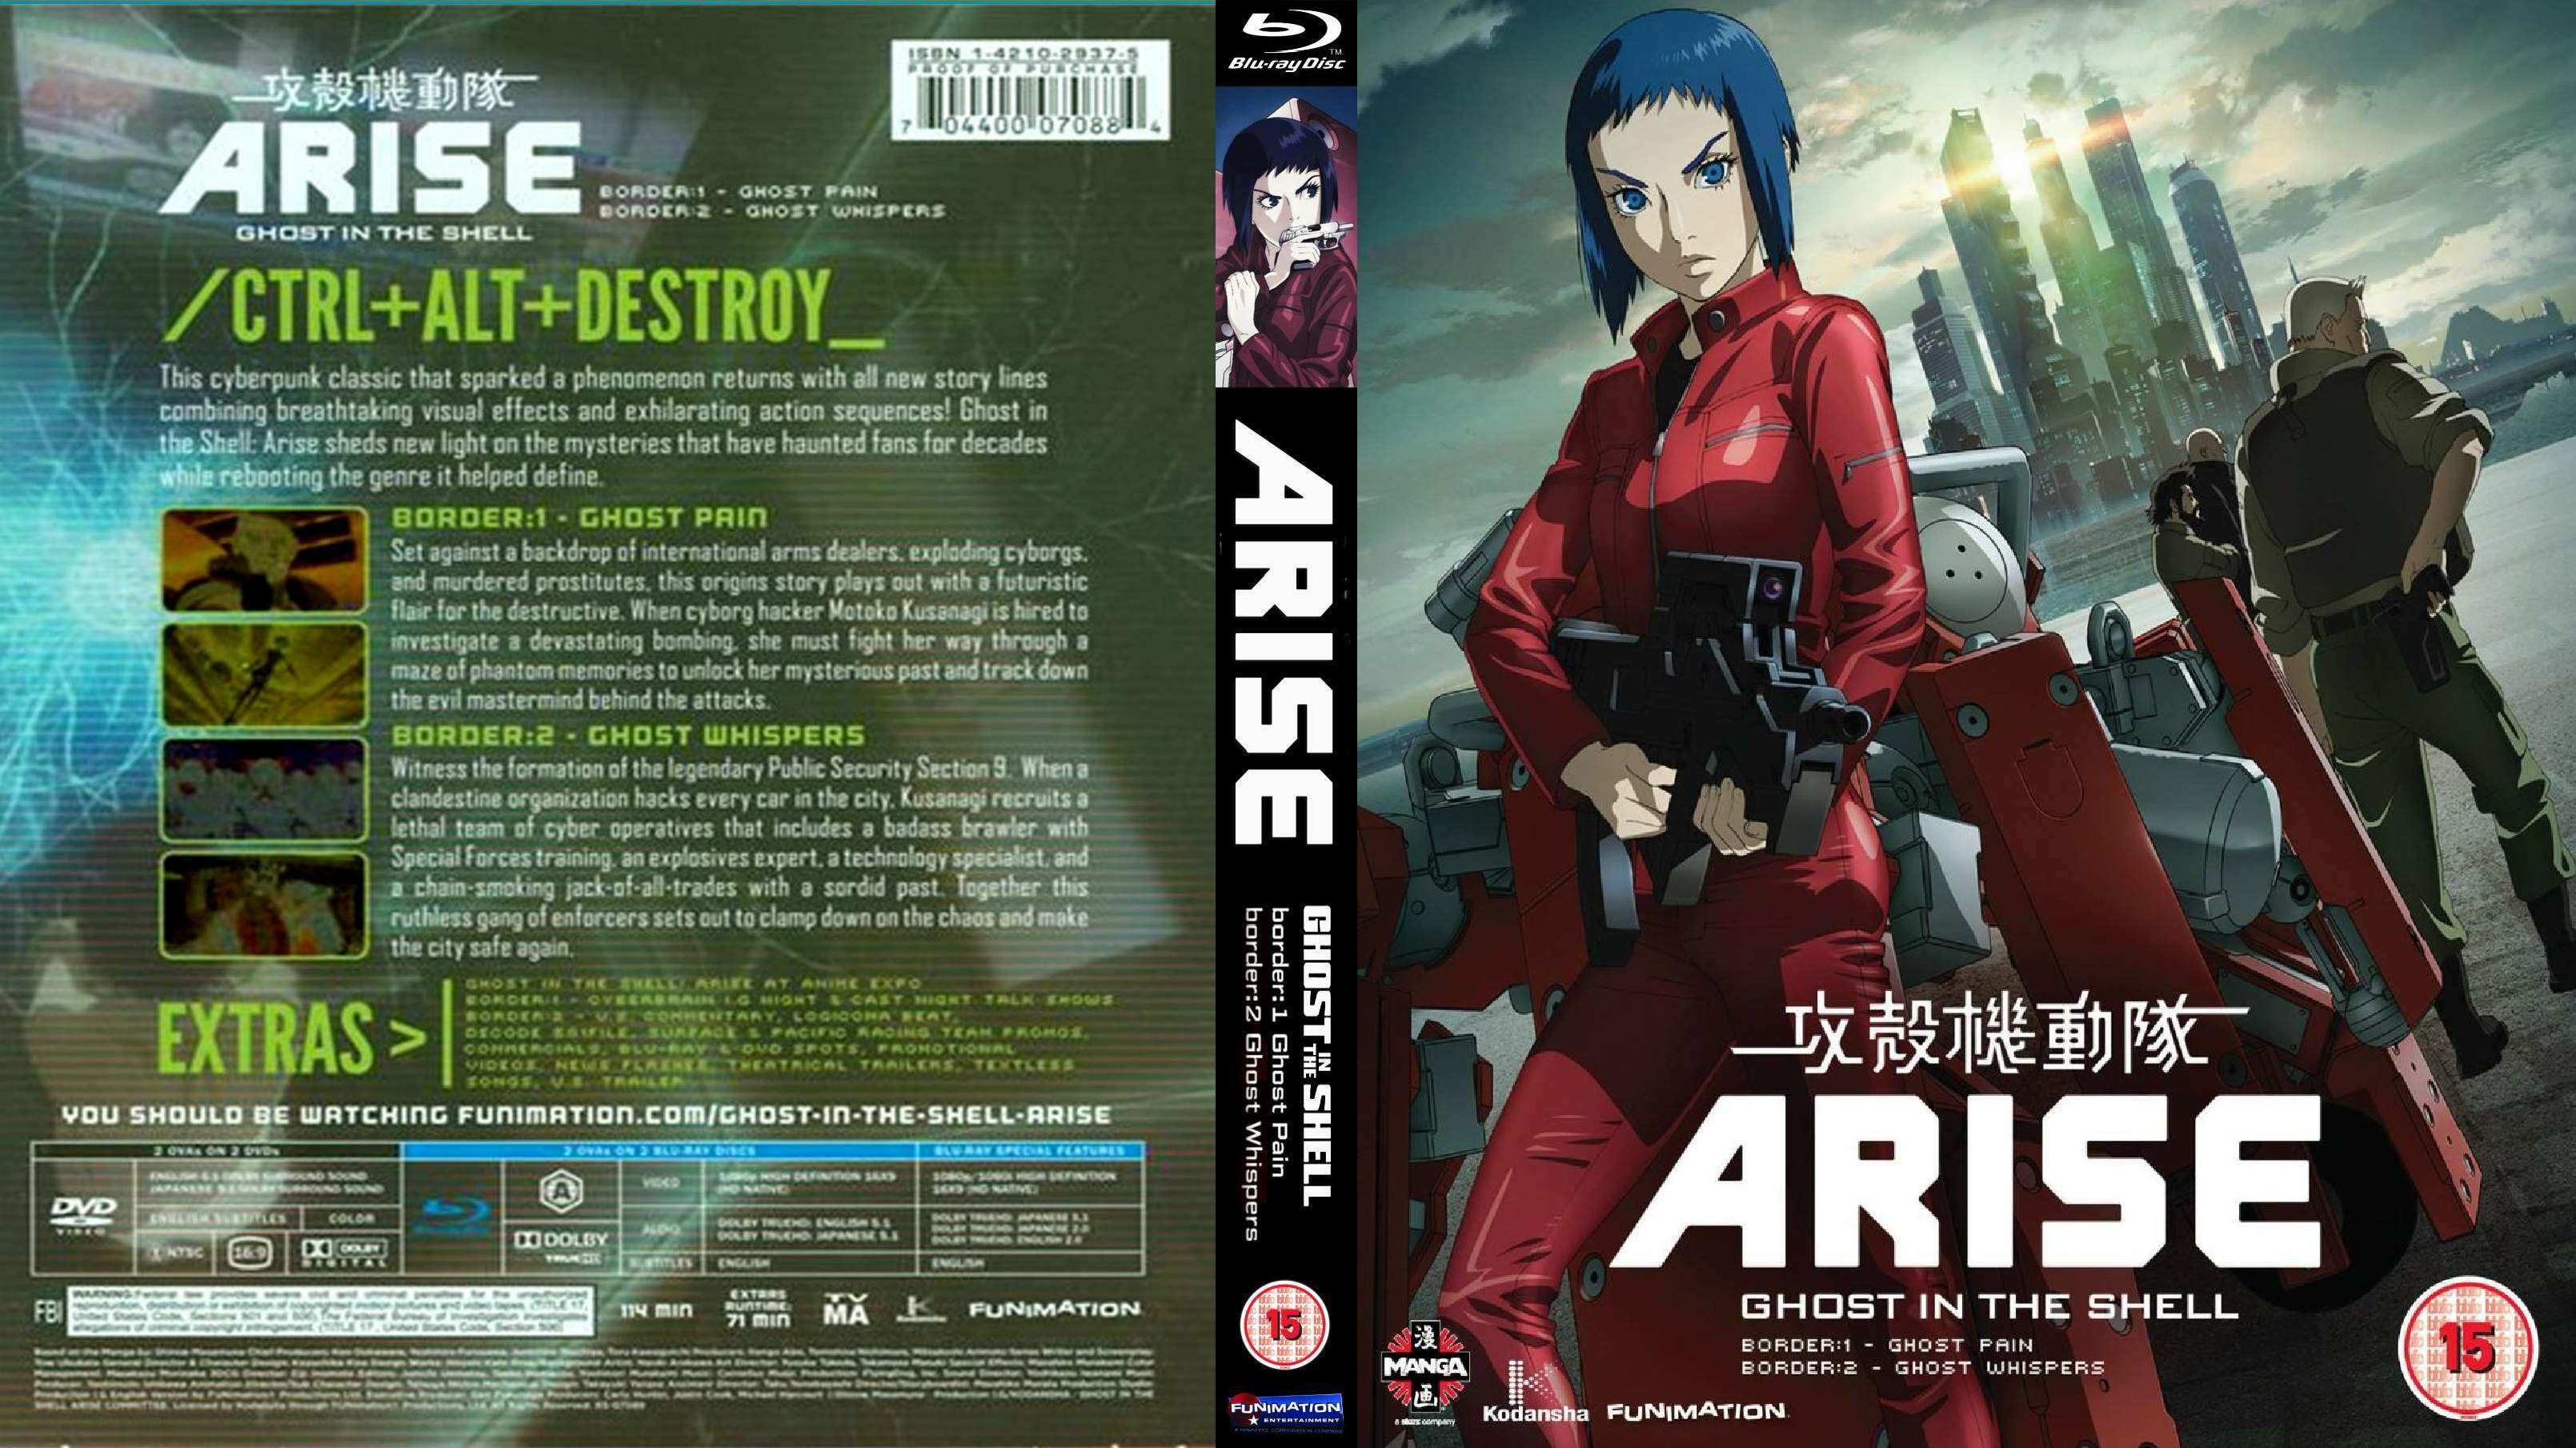 Covers Box Sk Ghost In The Shell Arise Border 13 1 2 High Quality Dvd Blueray Movie